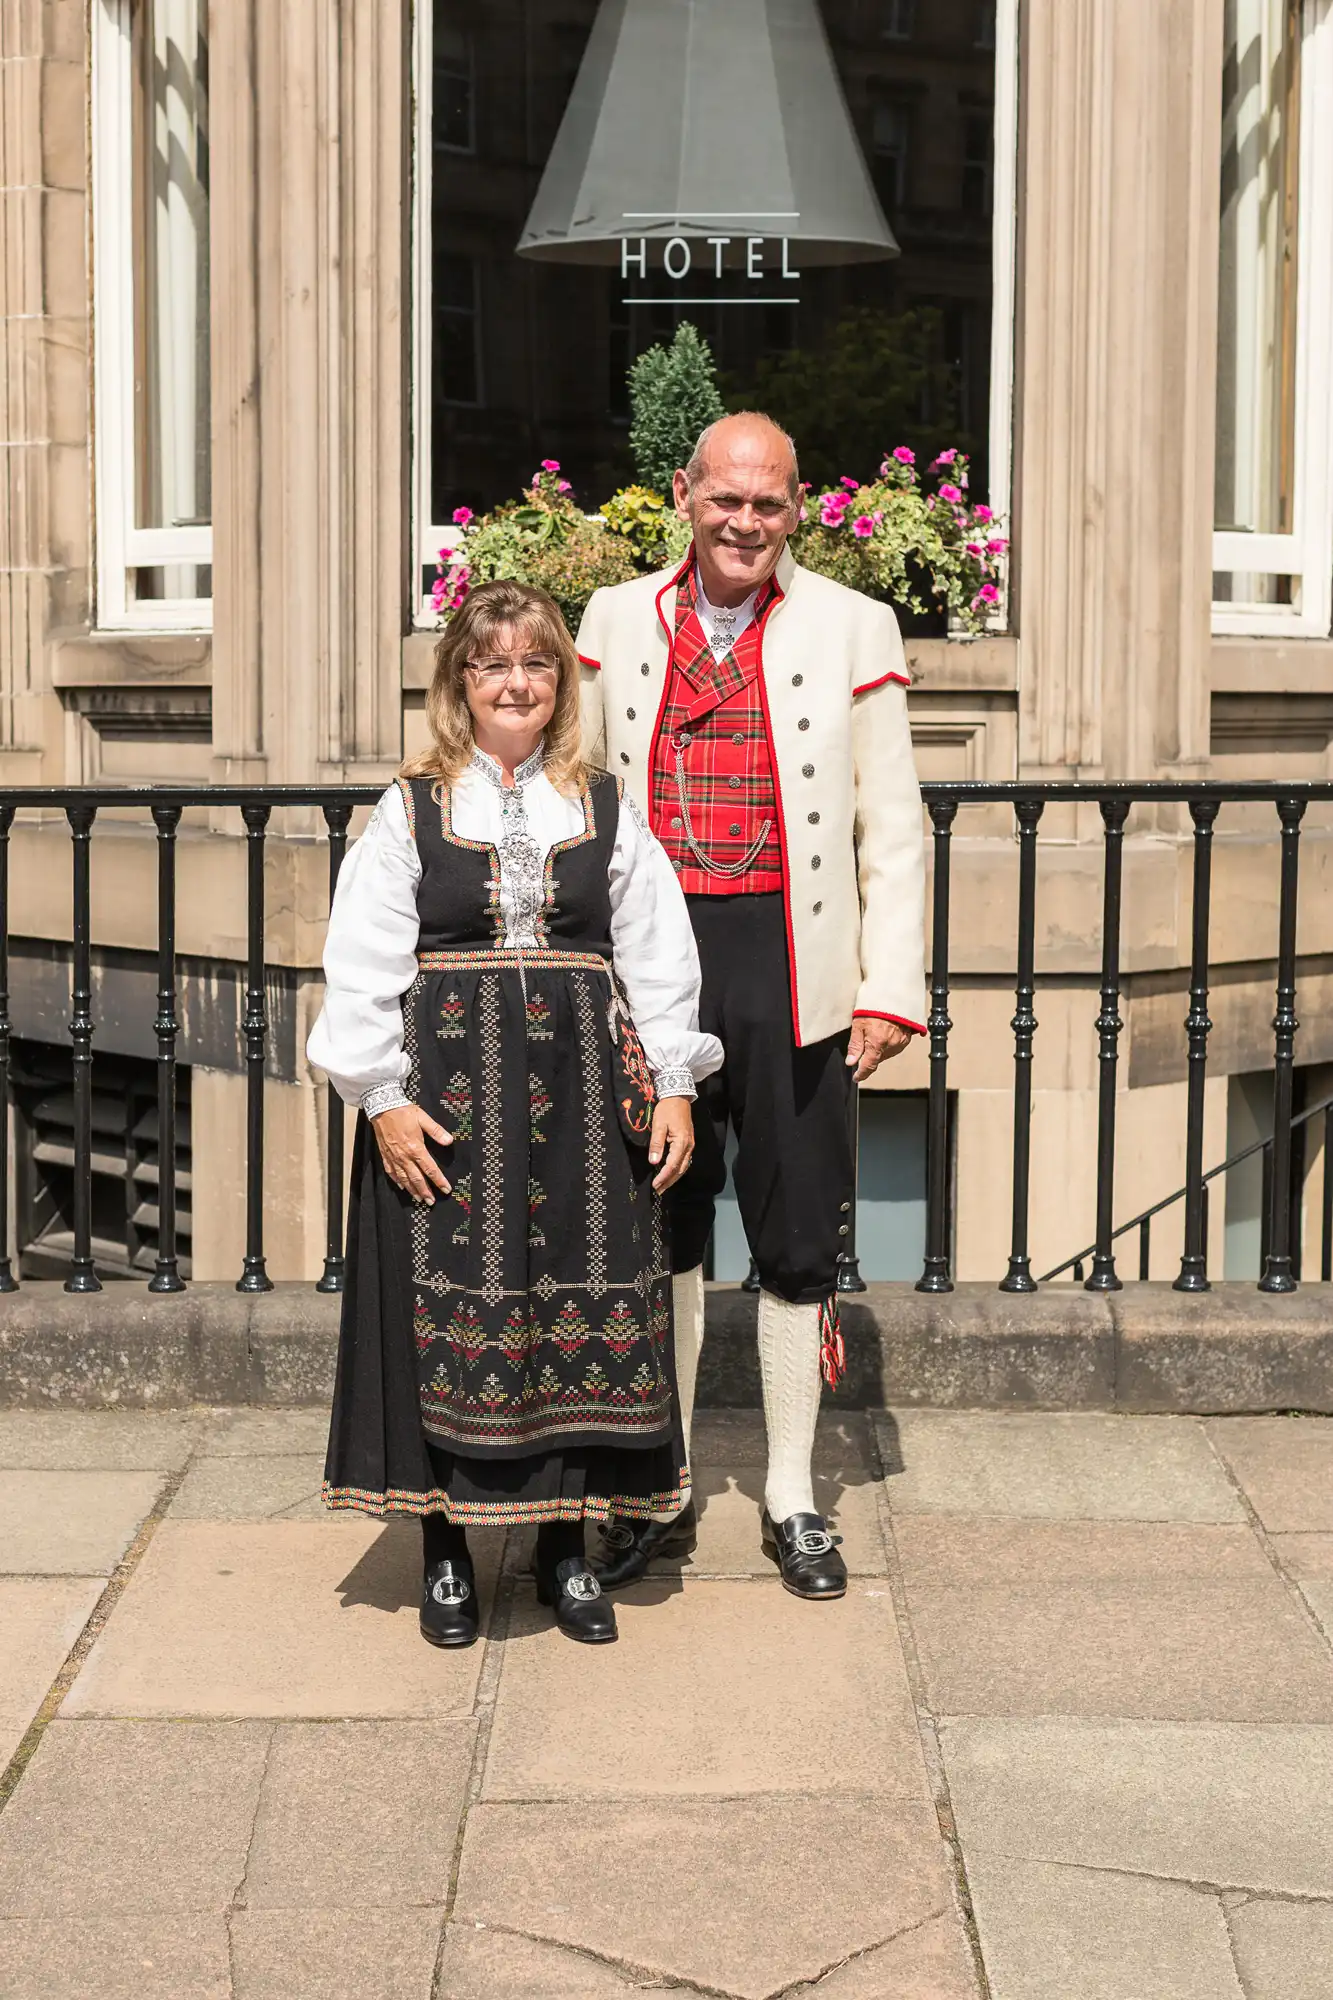 A man and a woman wearing traditional norwegian costumes, standing in front of a hotel entrance.